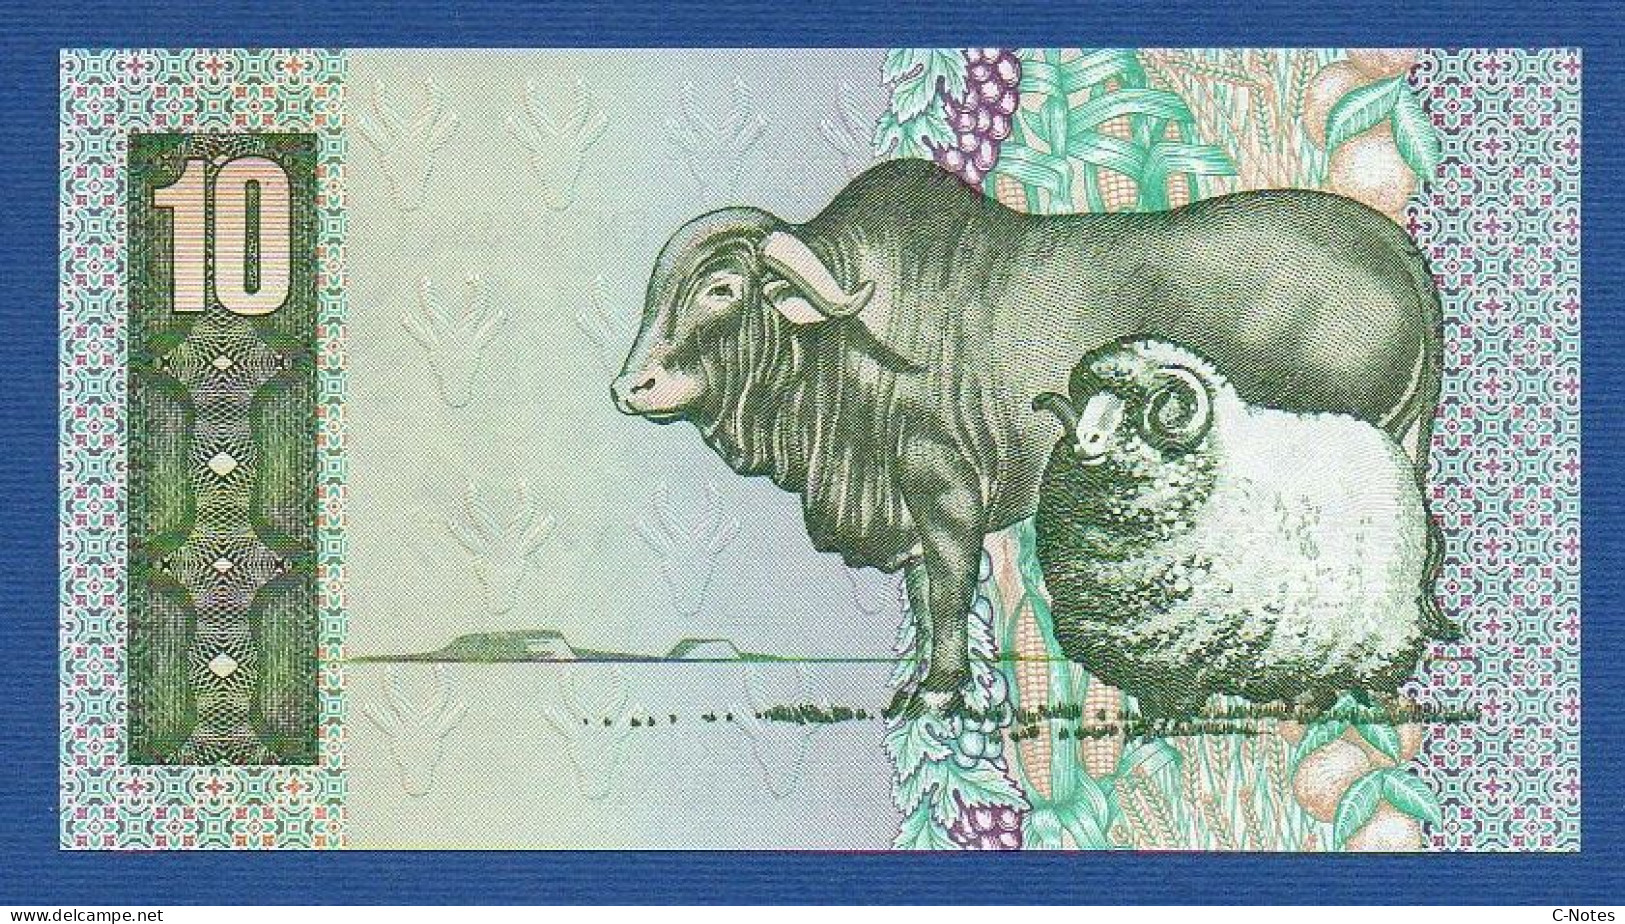 SOUTH AFRICA - P.120d – 10 RAND ND (1985 - 1990) UNC, S/n EM7483814C - South Africa